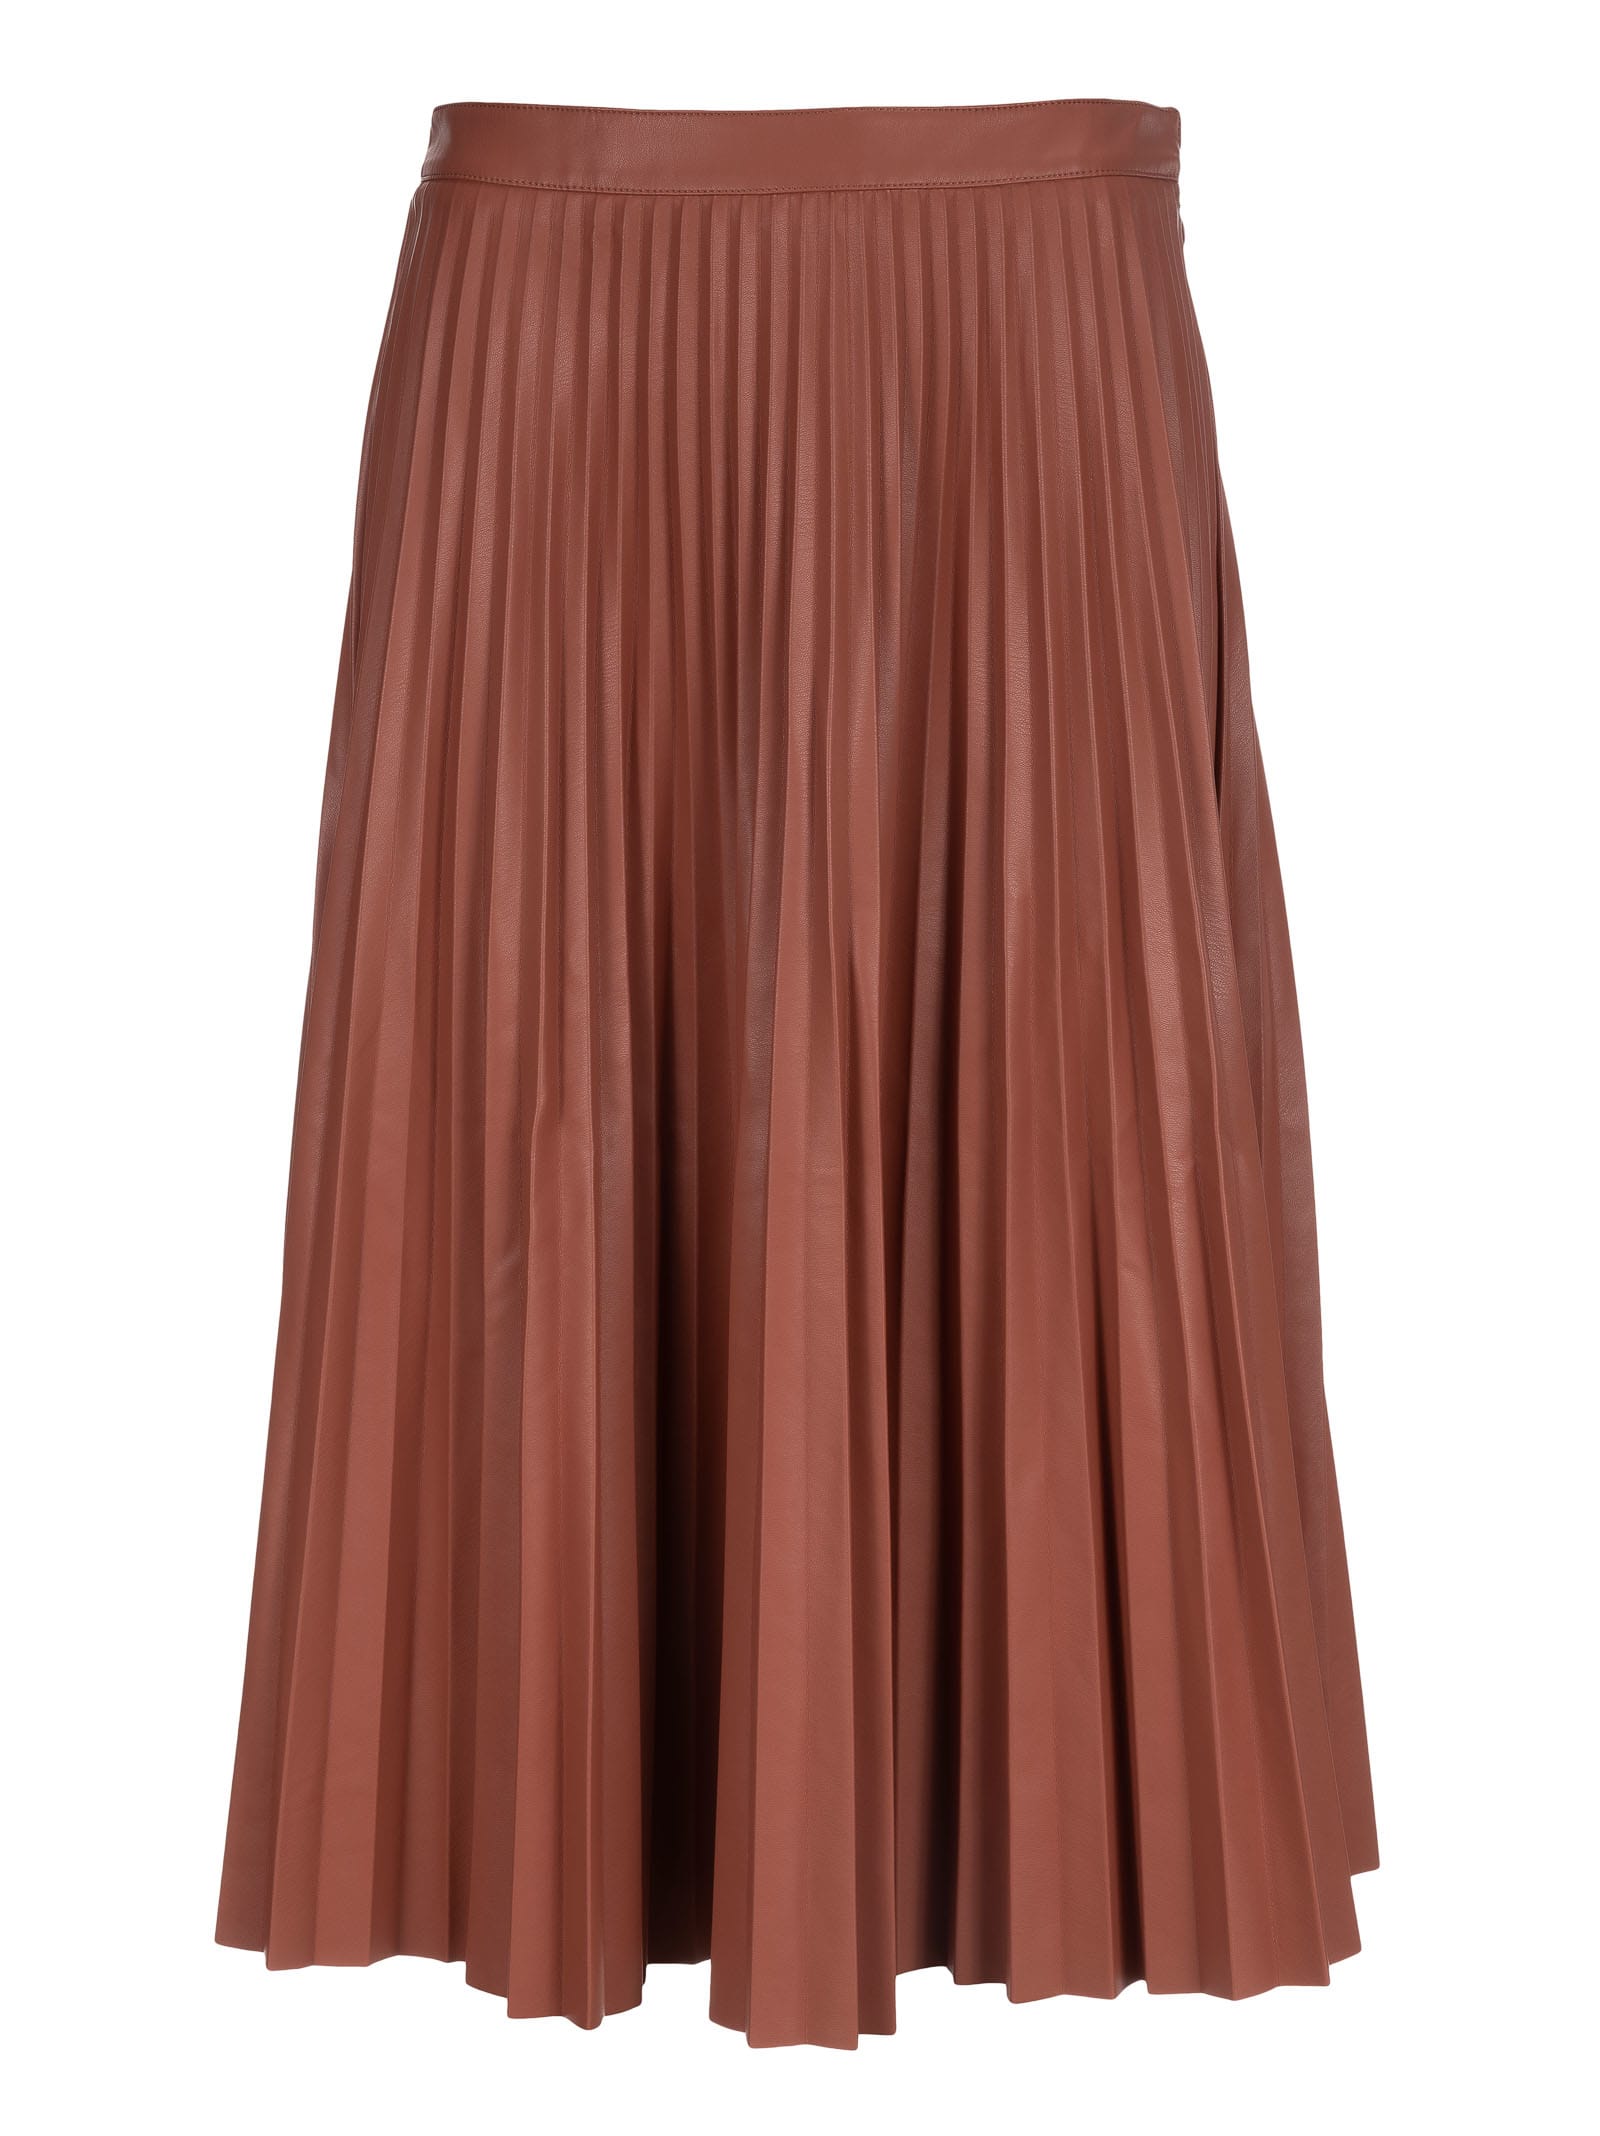 Proenza Schouler Pleated Faux-leather Skirt